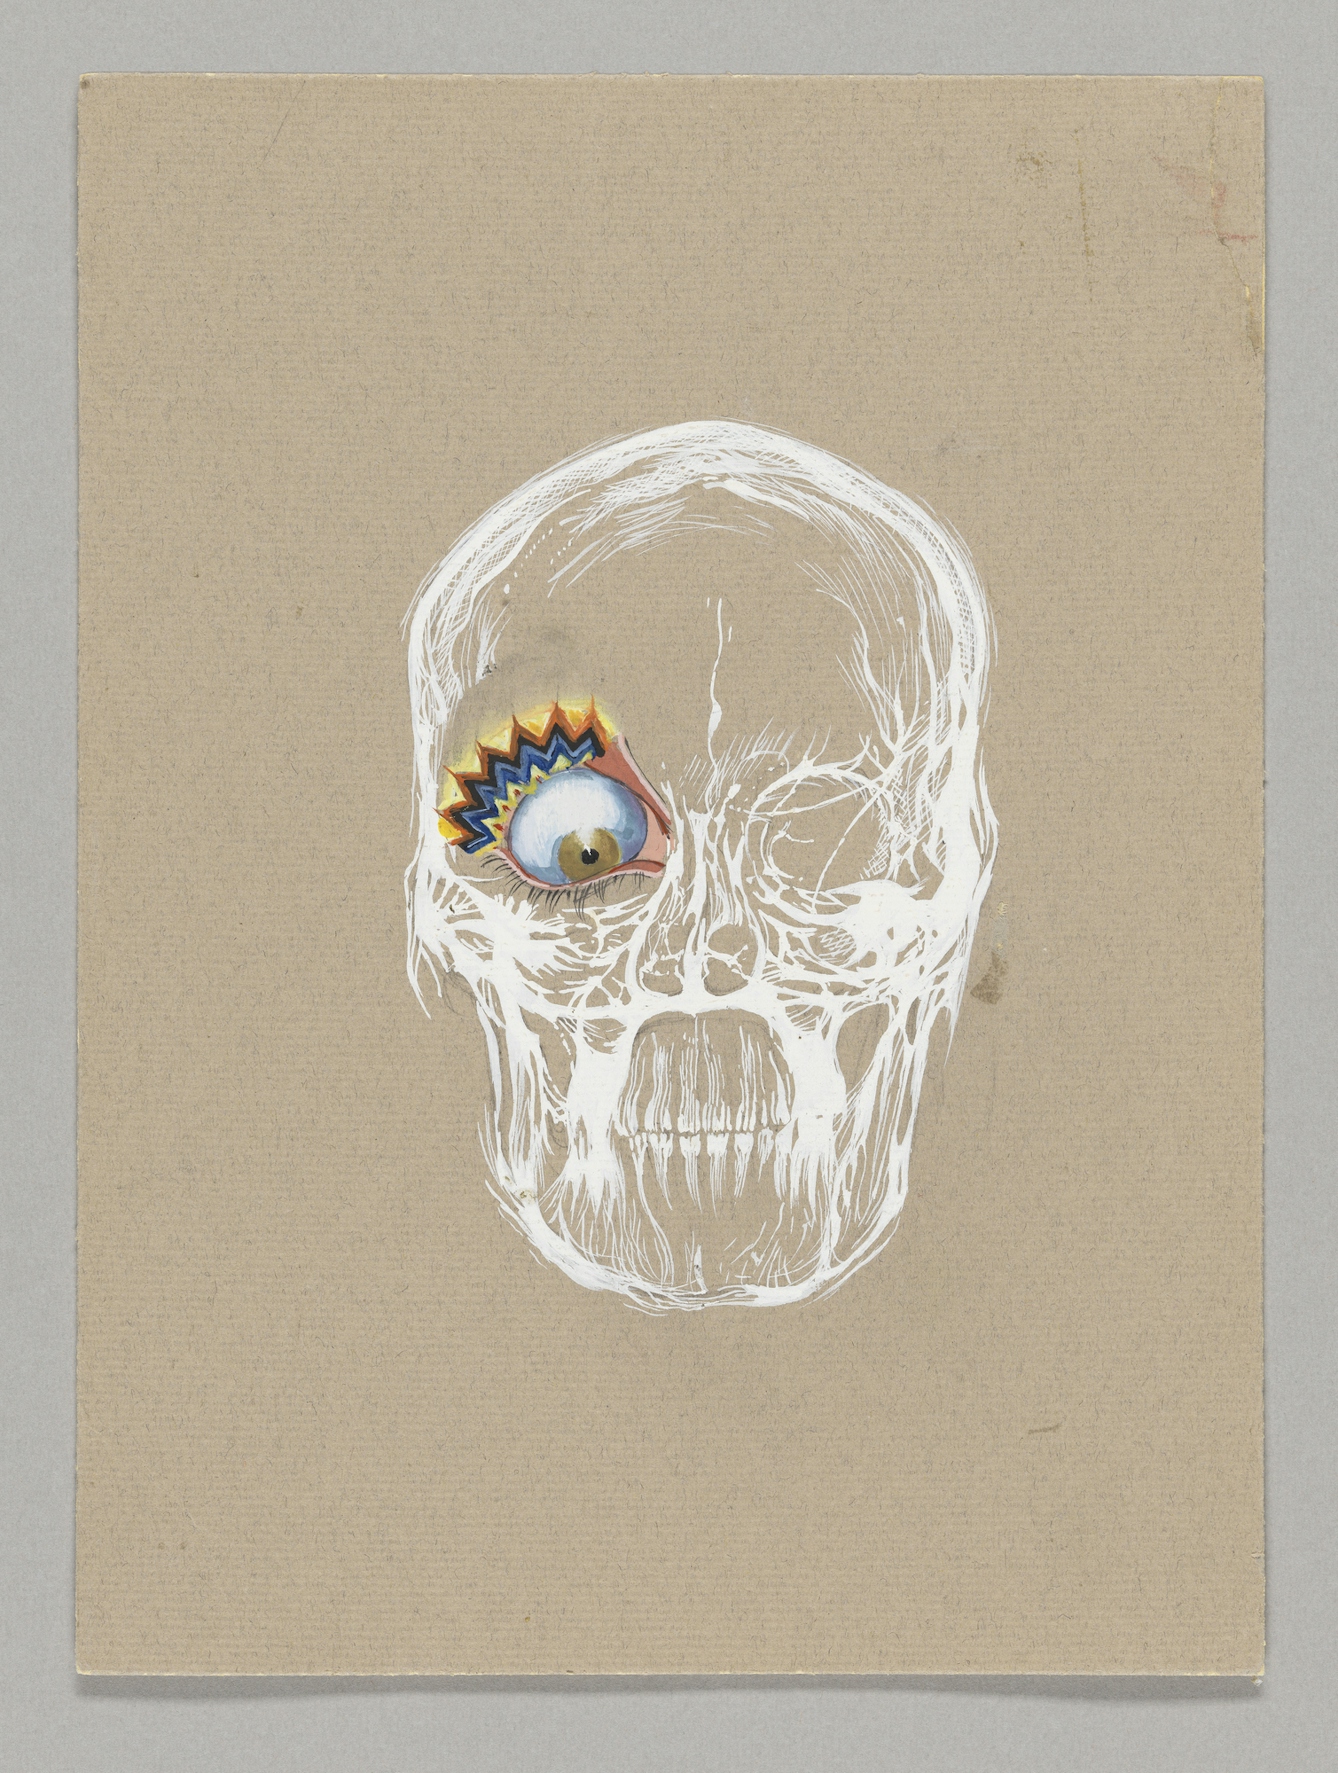 A detailed line drawing or human skull in white on a beige background. The skull's right socket is filled with an eyeball, painted in colour, and looking downwards. There are jagged multi-coloured zig-zag graphics in place of an eyebrow